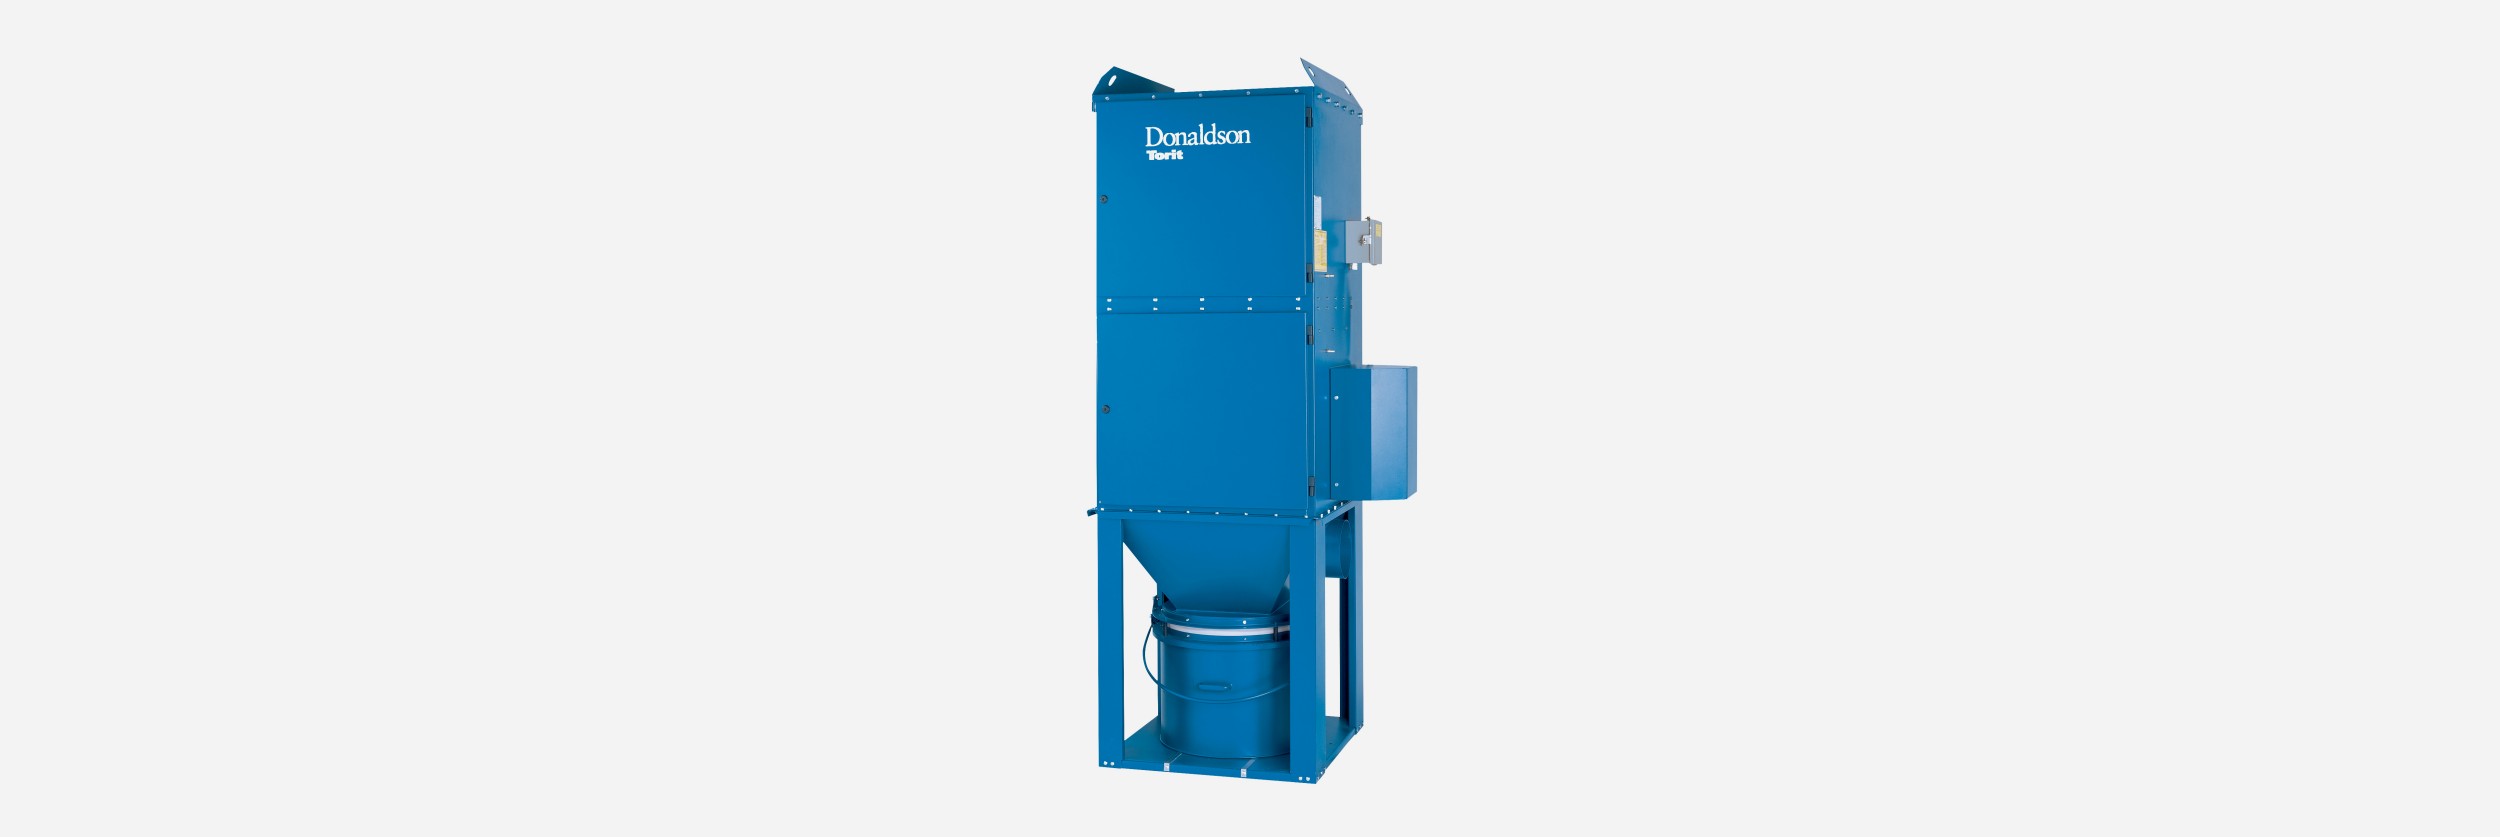 Donaldson Unimaster Baghouse Dust Collector | AIRPLUS Industrial